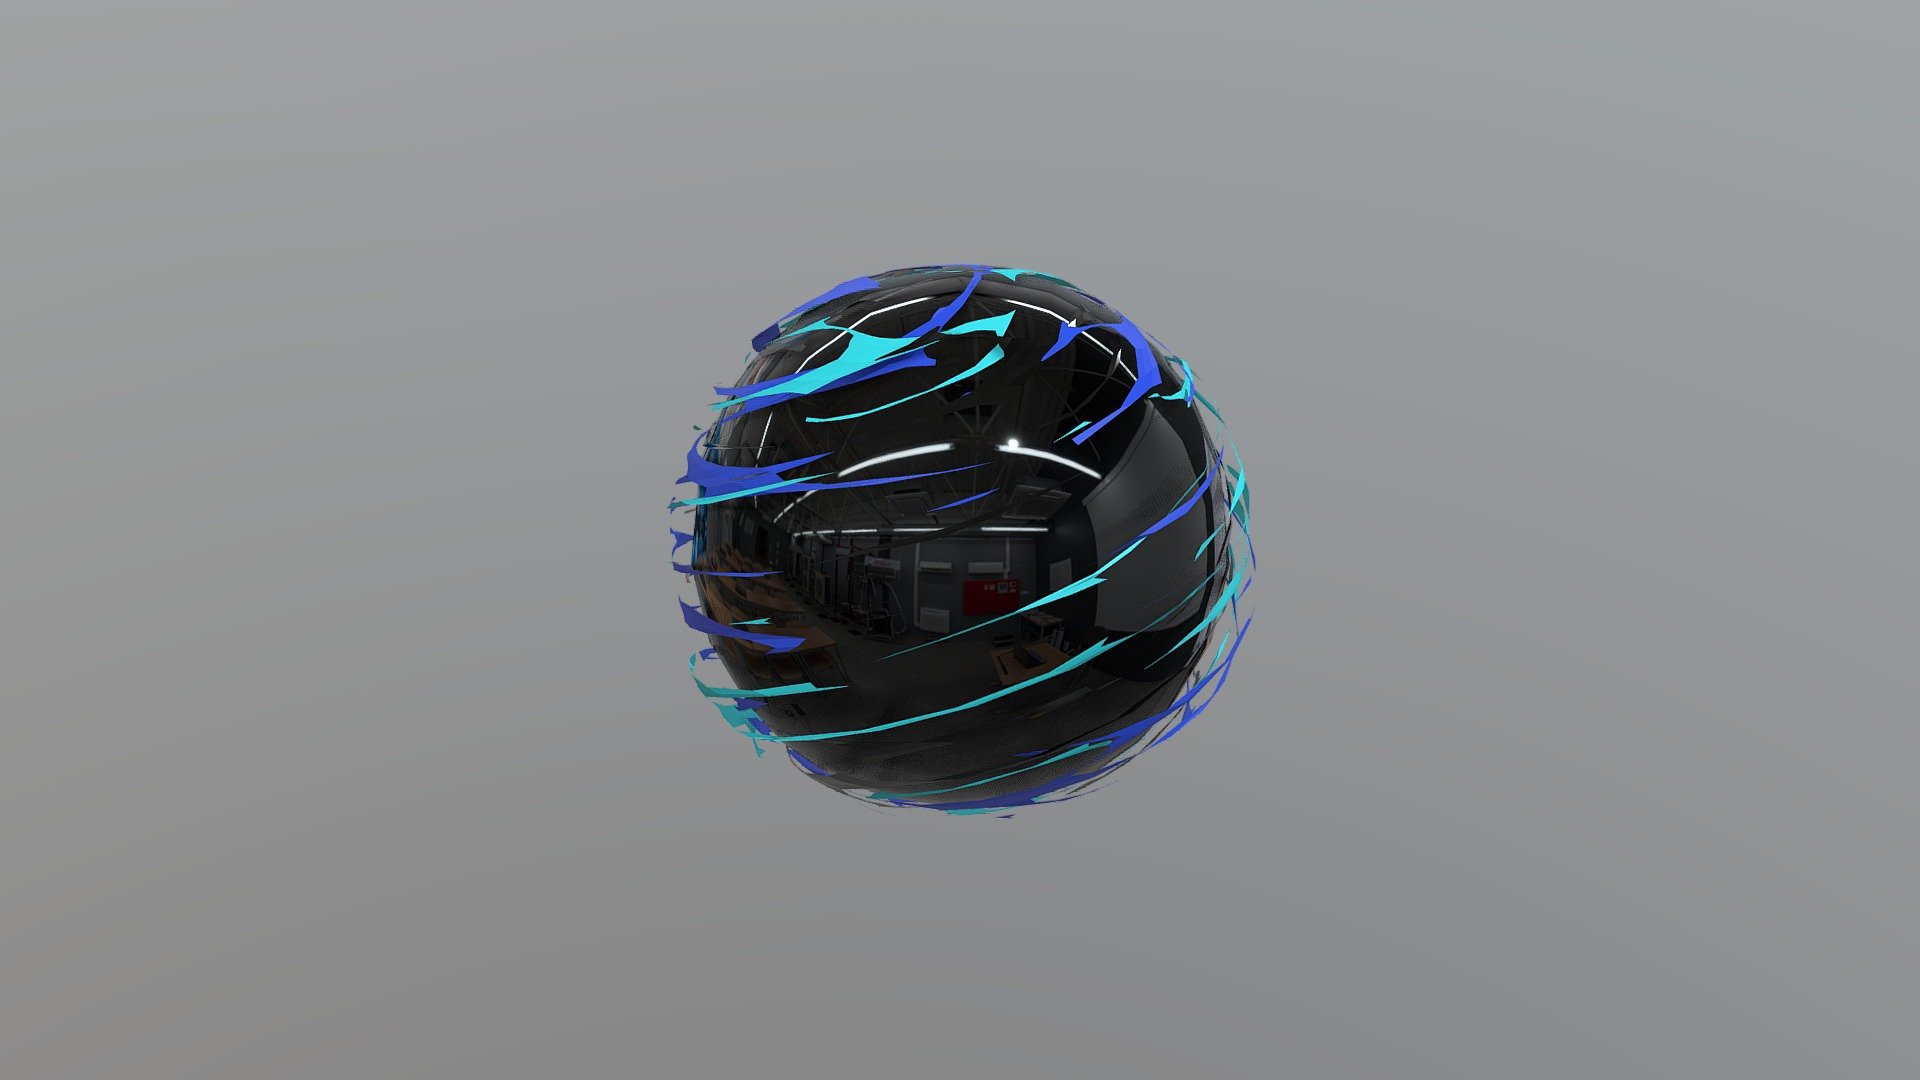 In roblox change the model material To Neon for Best looking! - Roblox Magic Sphere - Download Free 3D model by Sycho-ATH 3d model